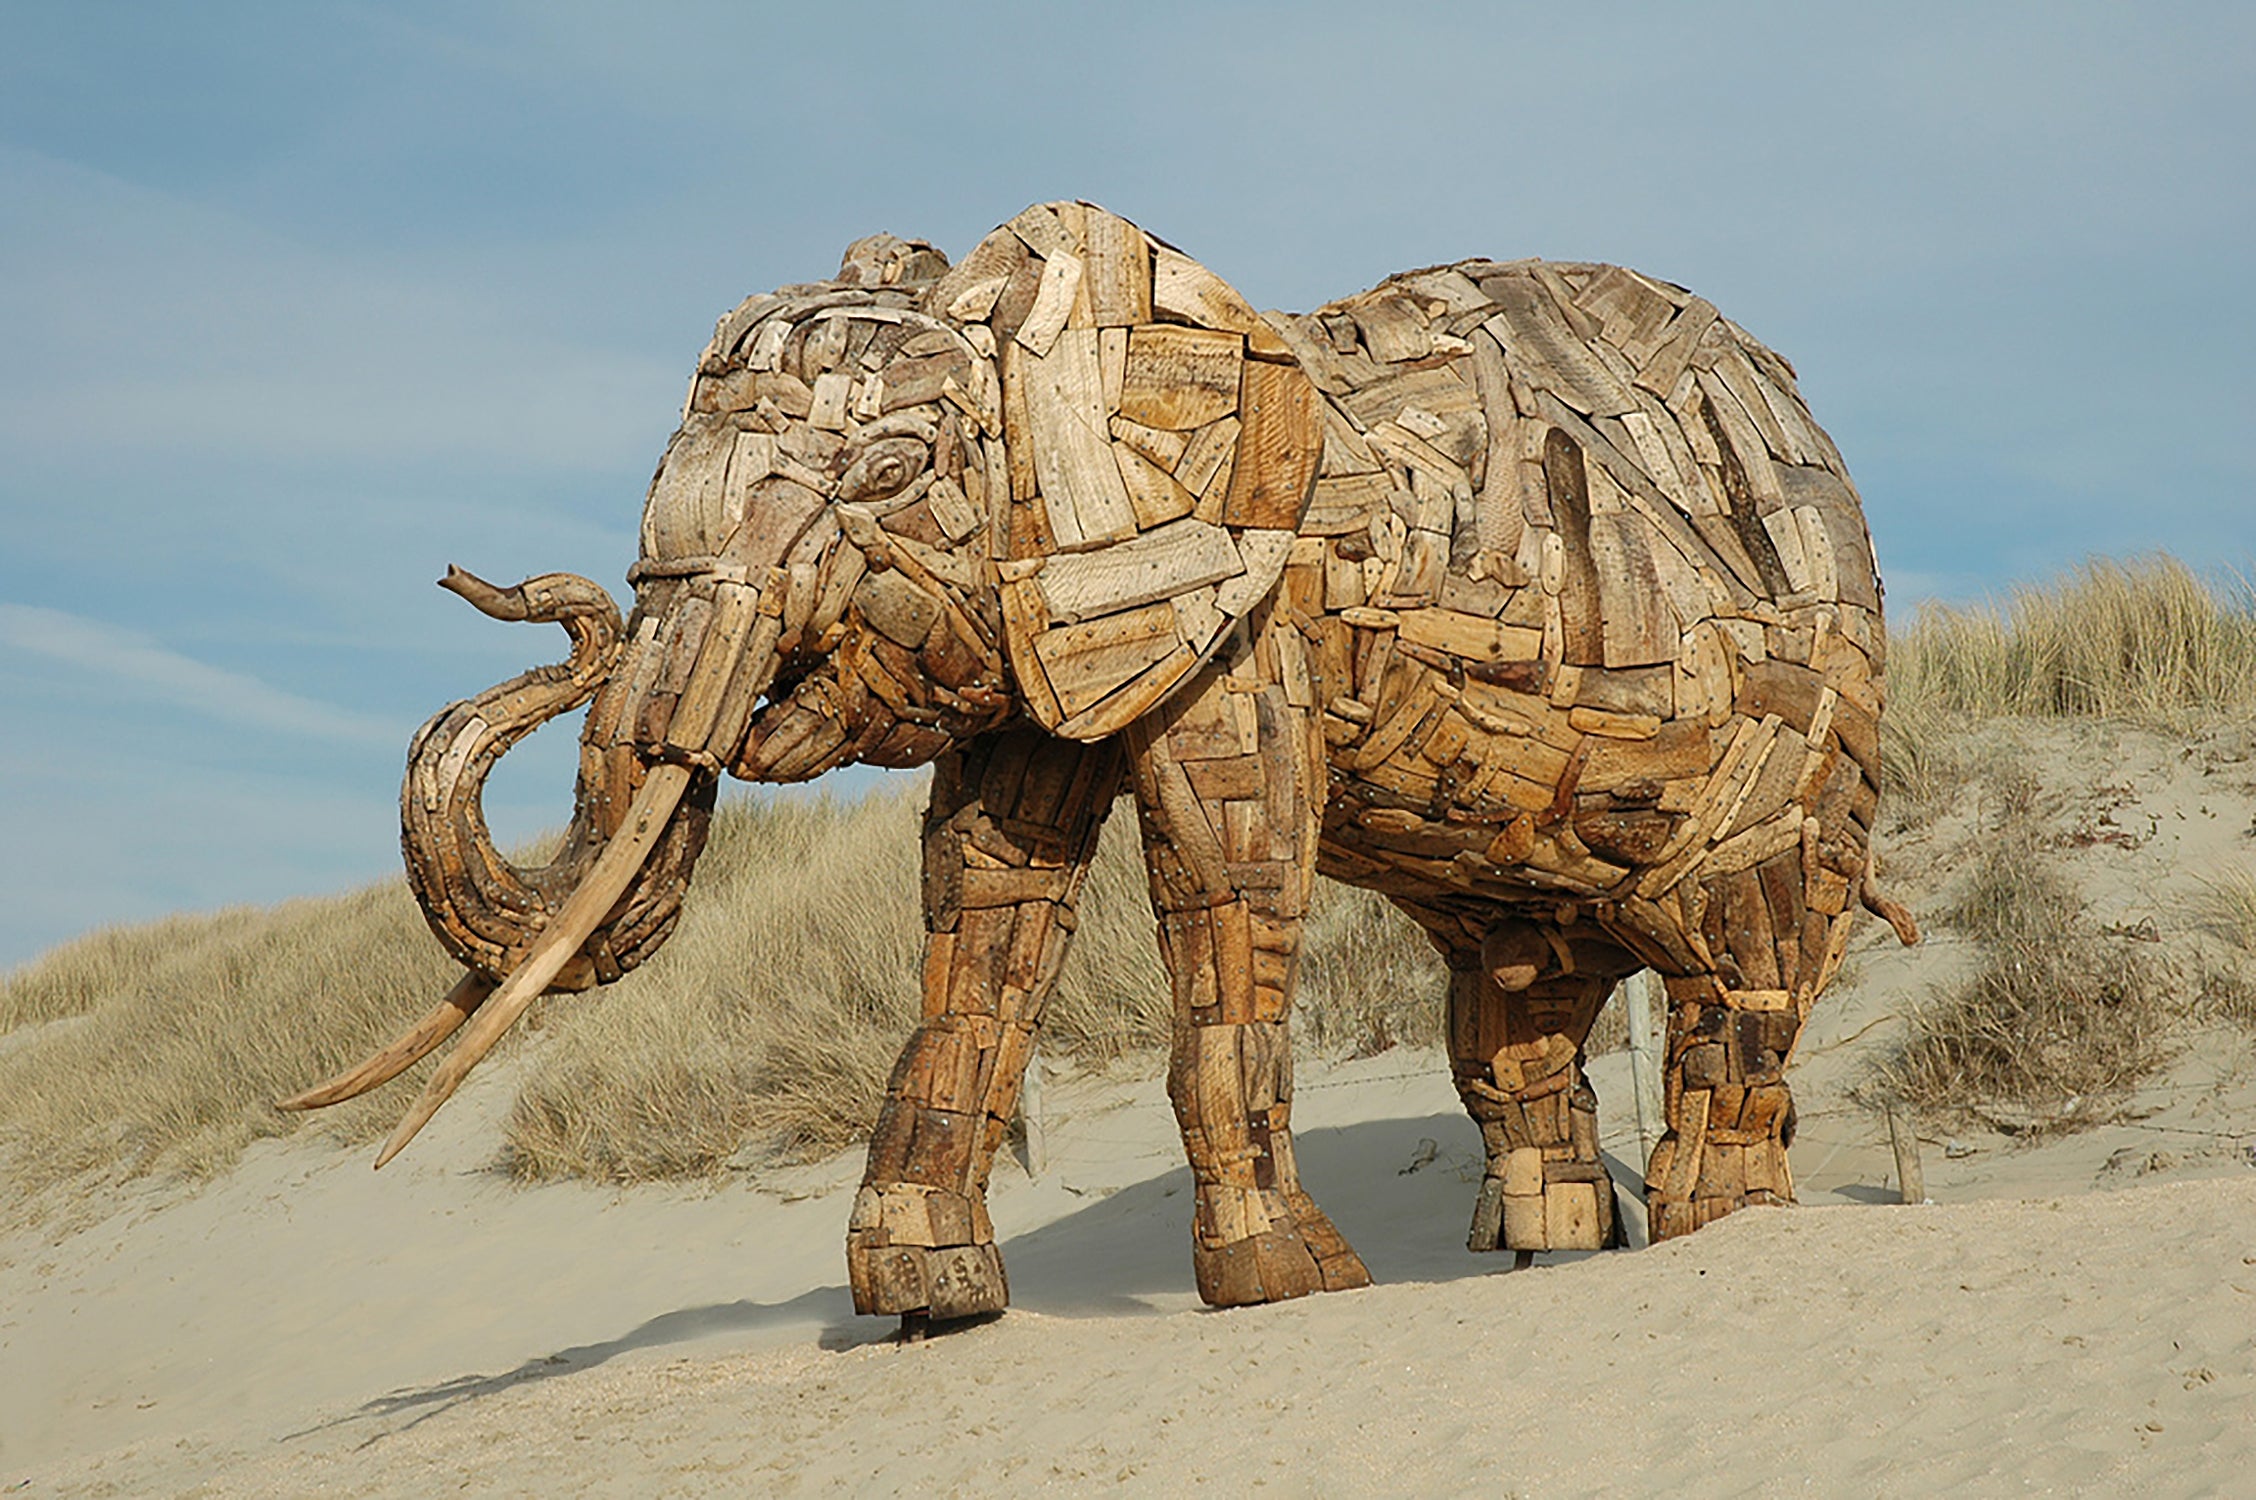 Safari Journal / Blog by Safari Fusion | Happy World Elephant Day | Driftwood sculpture by Andries Botha / South Africa